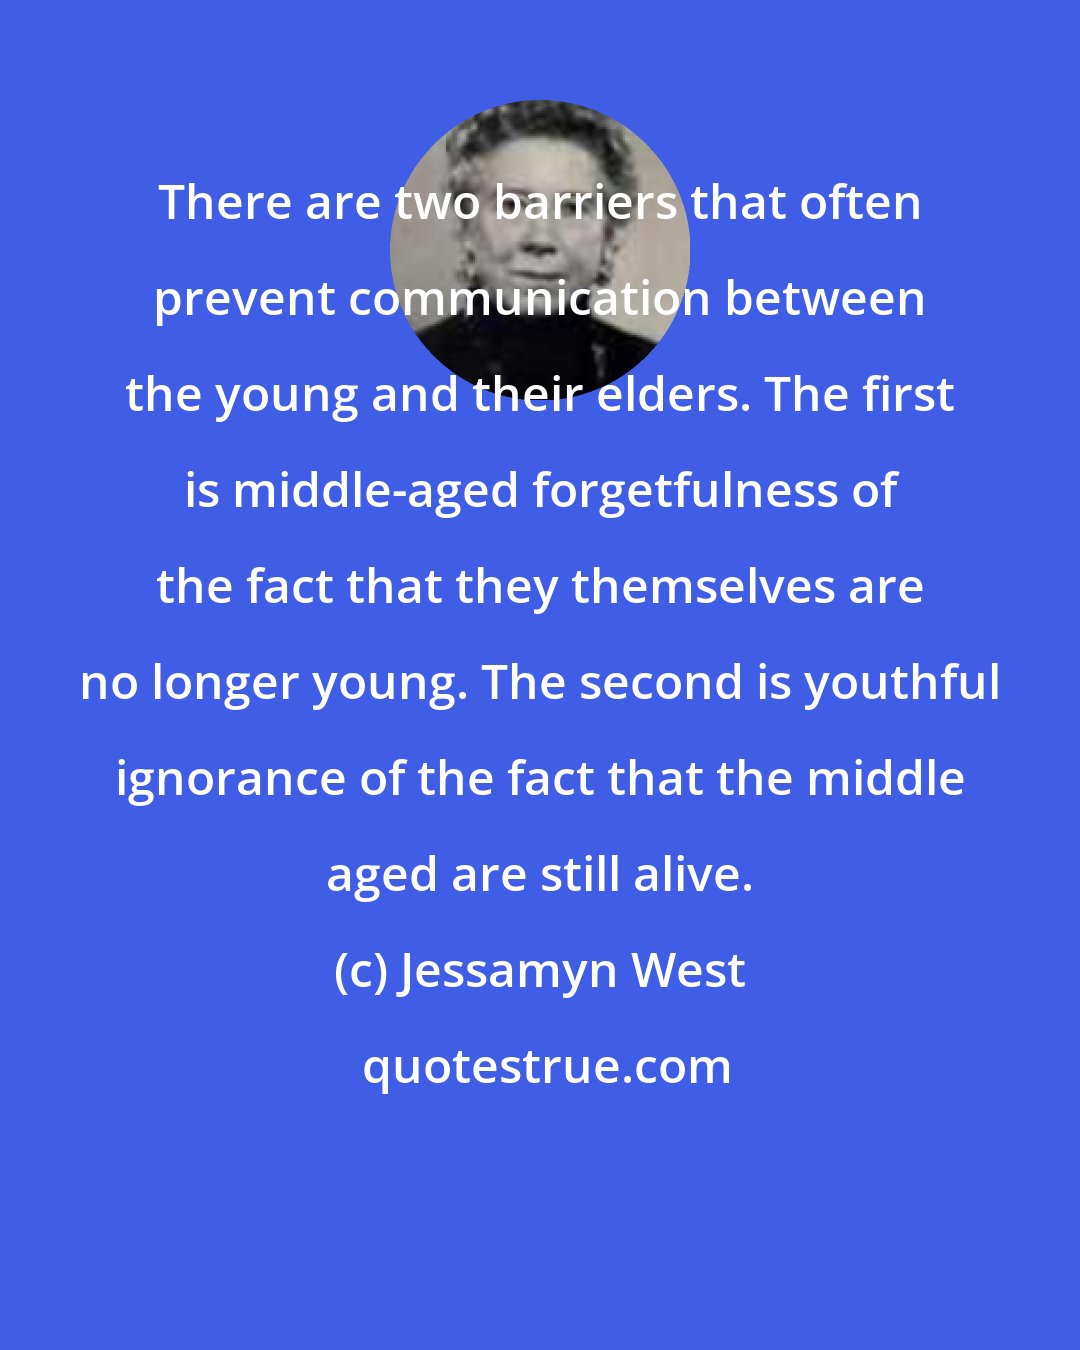 Jessamyn West: There are two barriers that often prevent communication between the young and their elders. The first is middle-aged forgetfulness of the fact that they themselves are no longer young. The second is youthful ignorance of the fact that the middle aged are still alive.